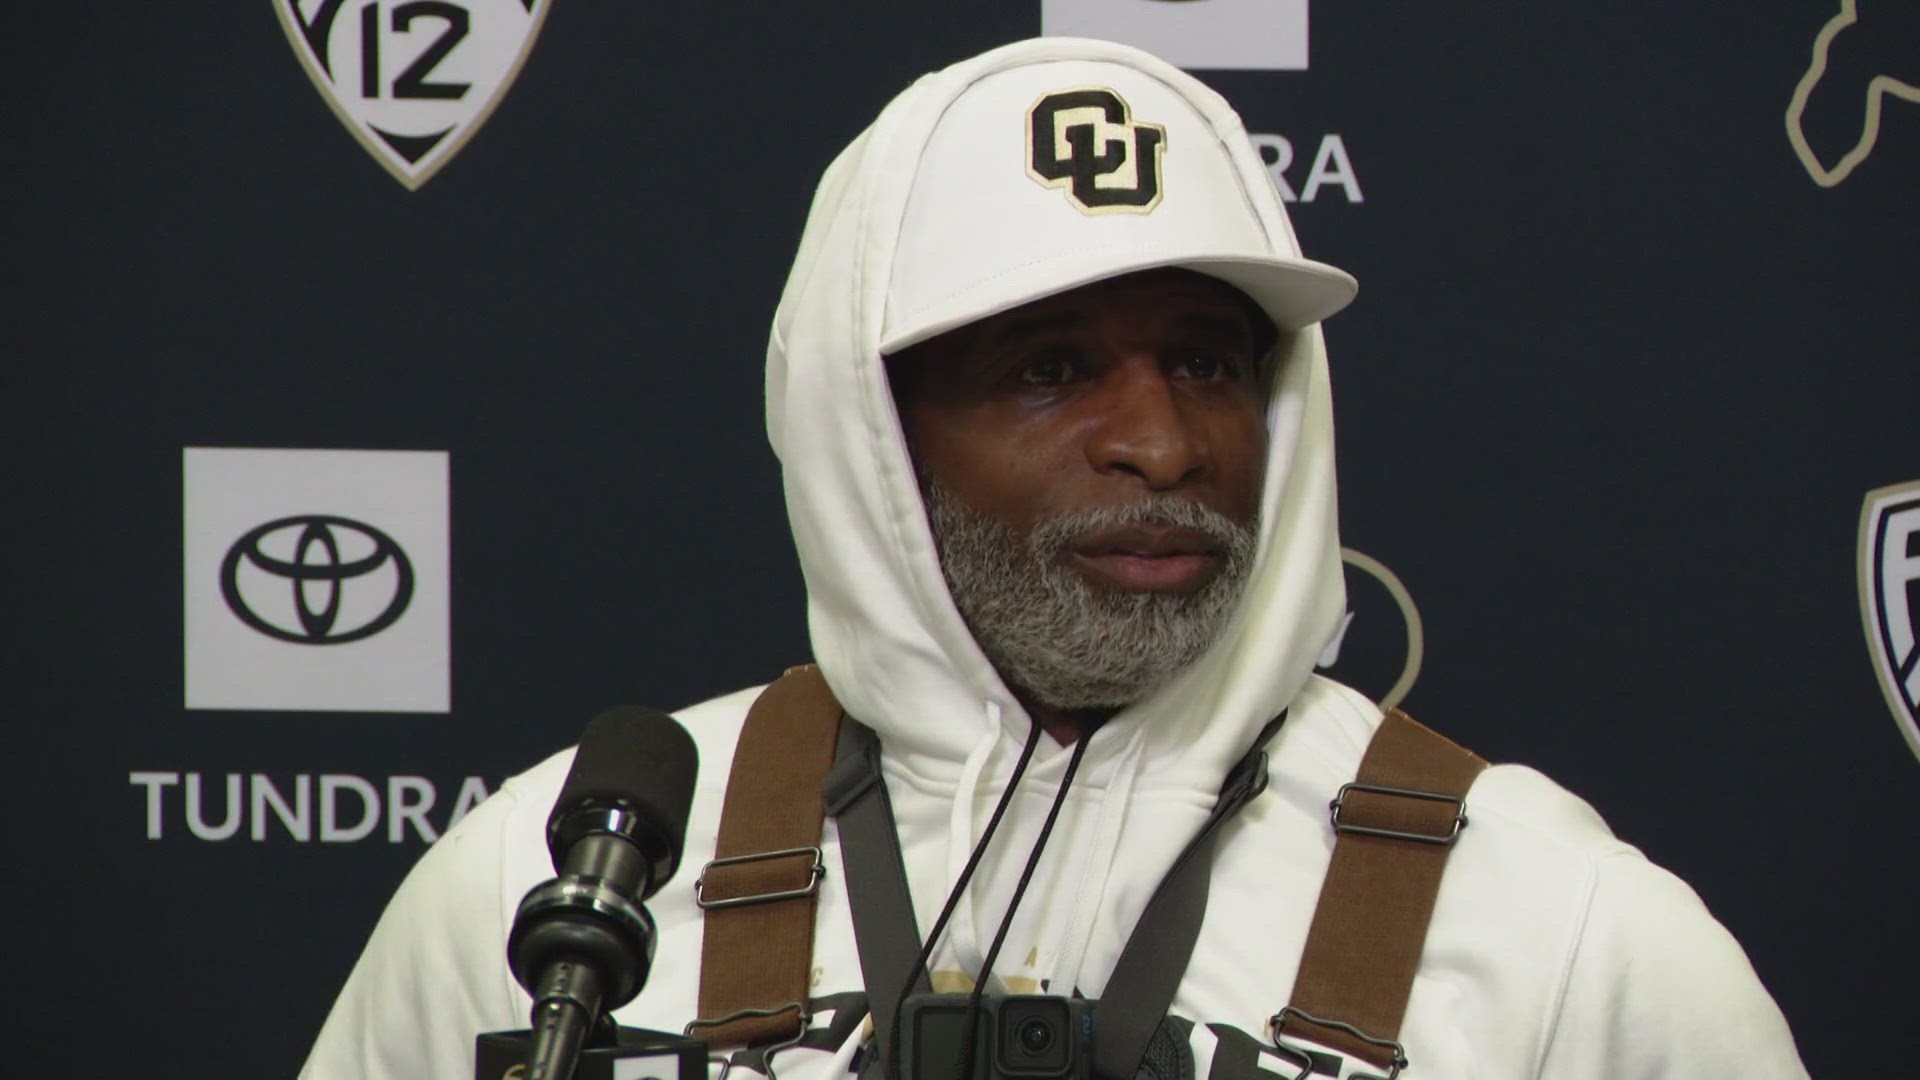 The coach says CU is only losing backups while trying to bring starters to Boulder.